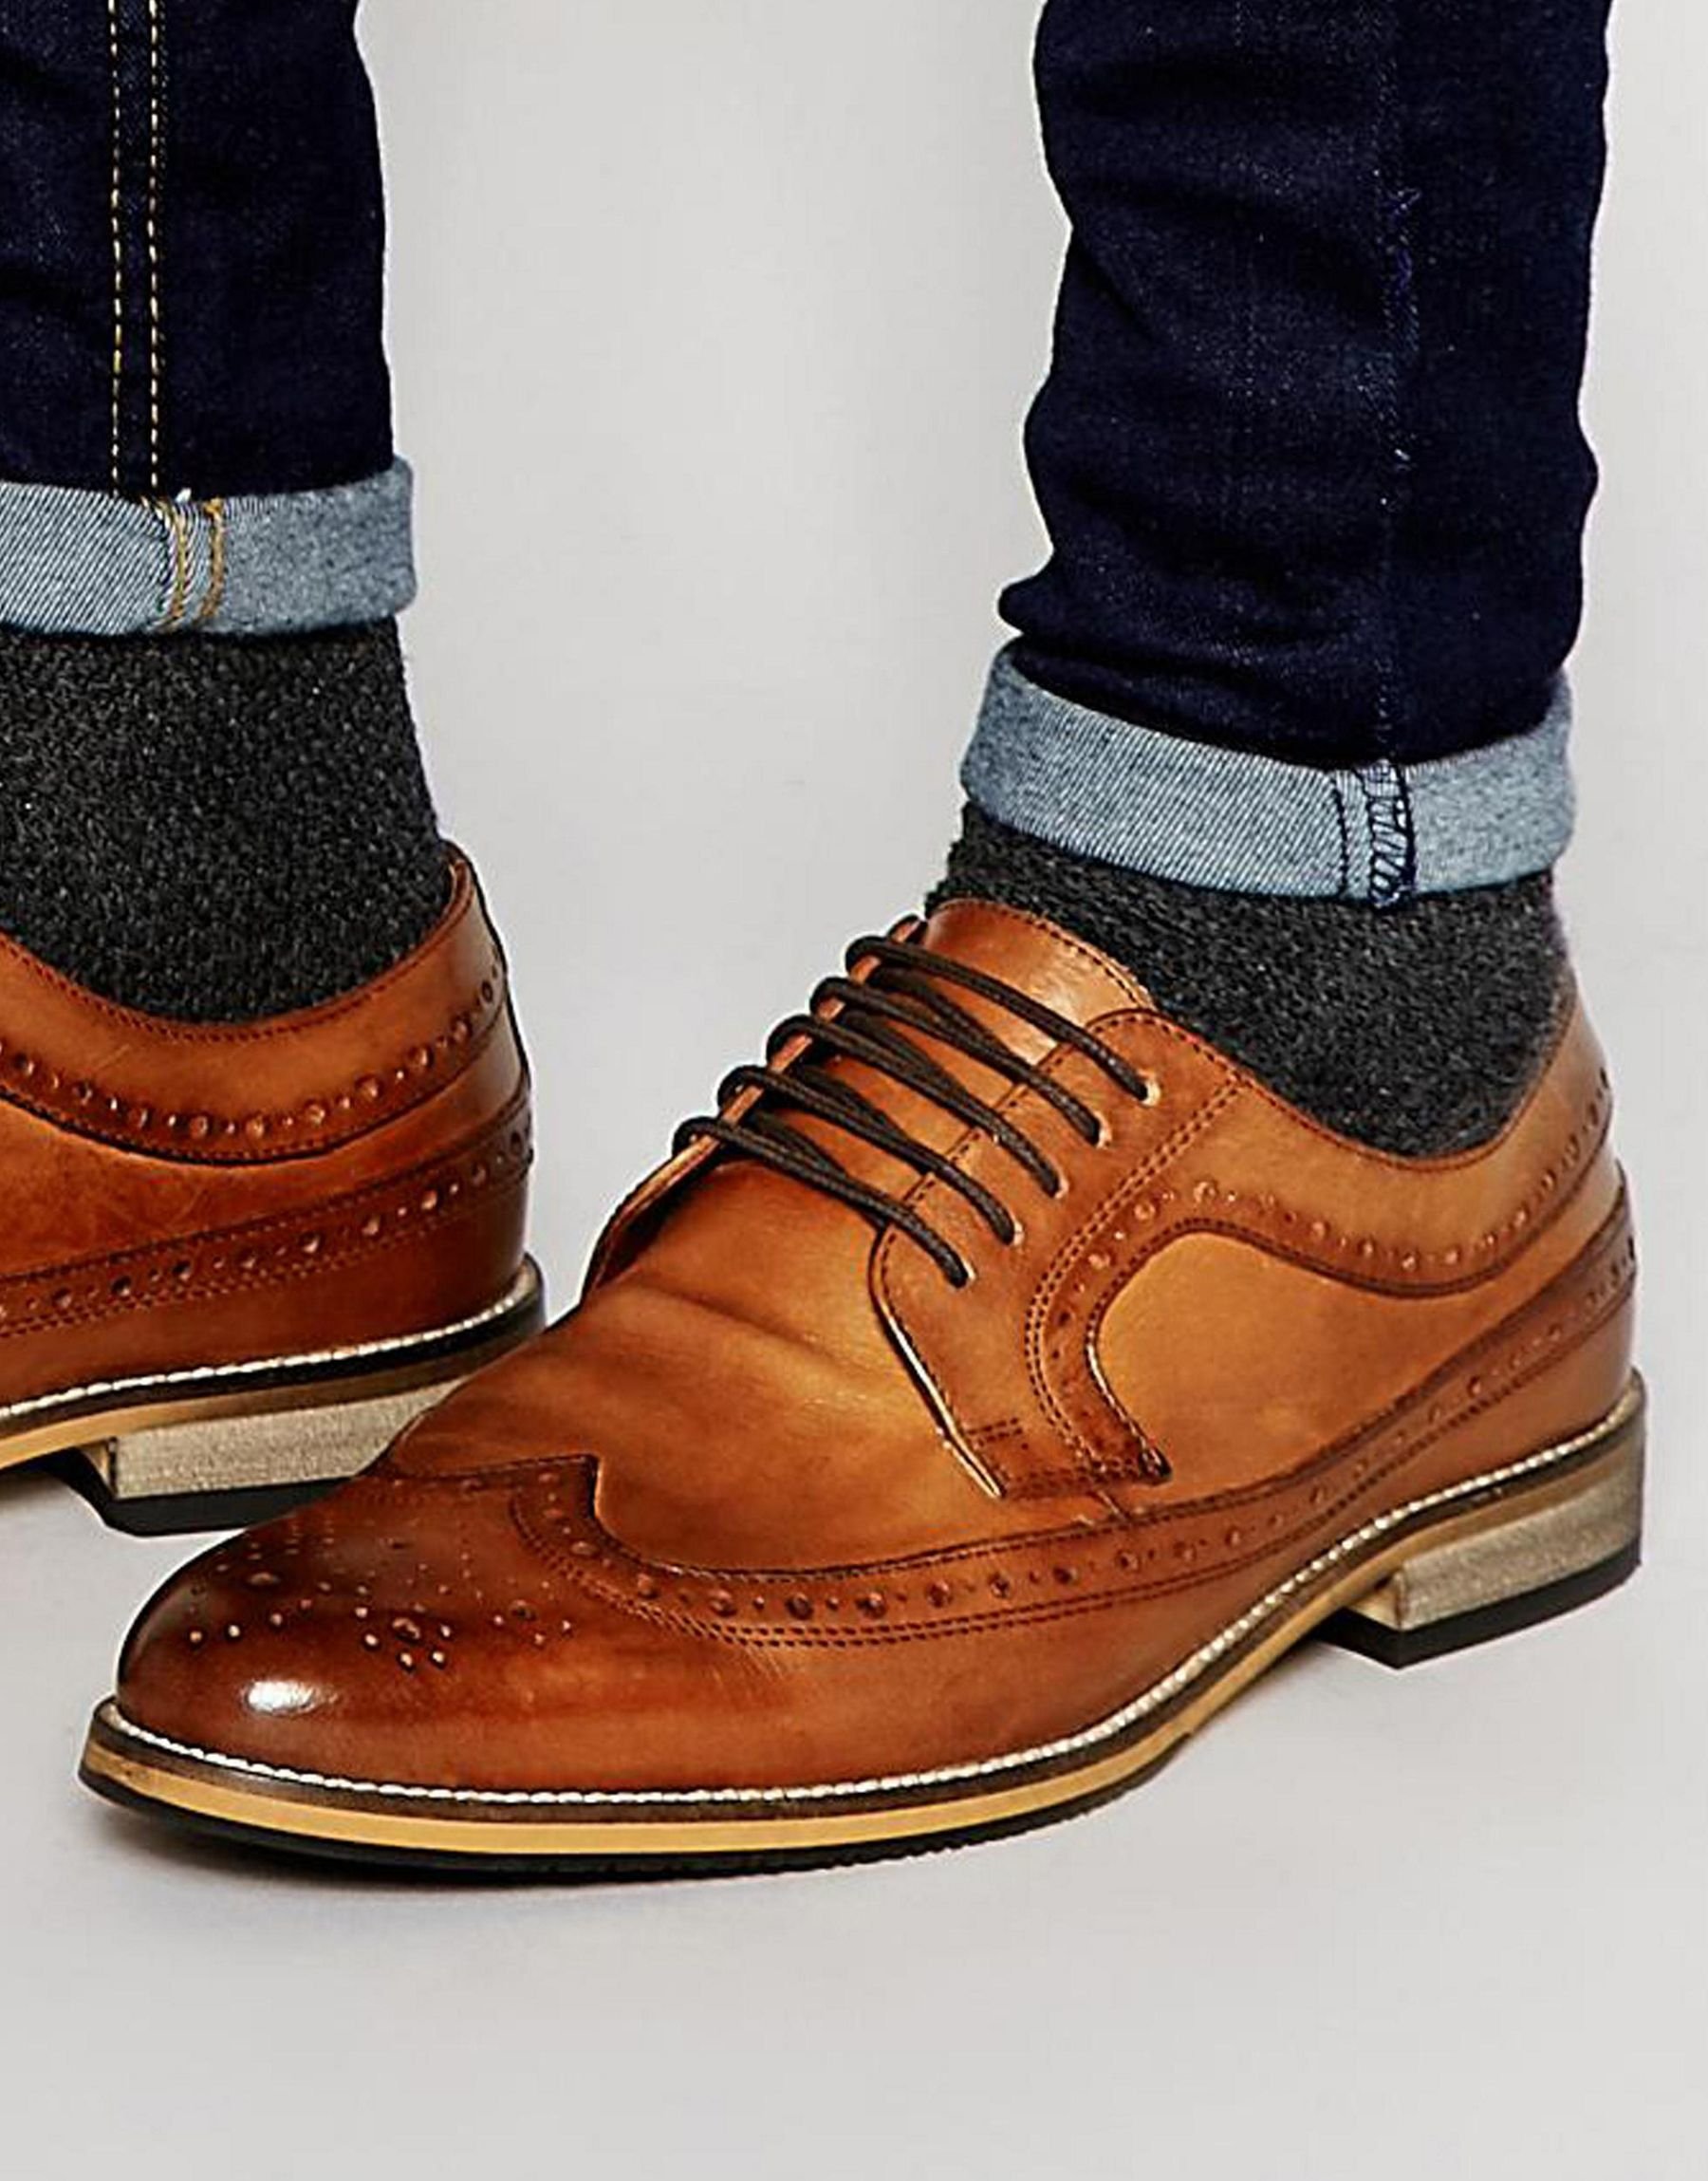 Asos Brogue Shoes In Tan Polished Leather in Brown for Men